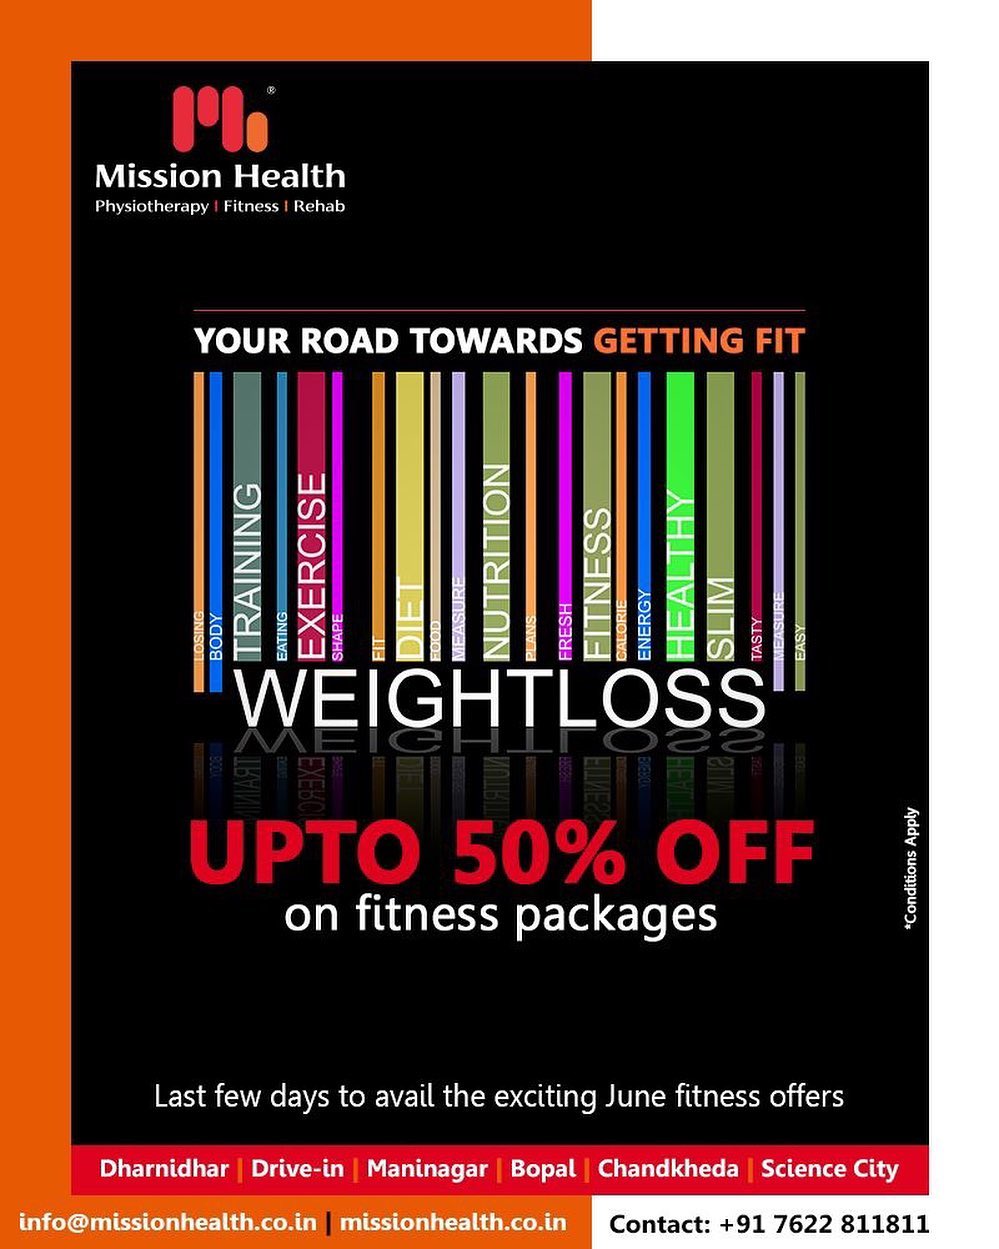 Invest in a fitter you! Last few days to avail exciting offers on Fitness at Mission Health! 
#FitnessOffers #JuneOffers #GetFit #MissionHealth #MissionHealthIndia  #fitnessRehab #AbilityClinic #MovementIsLife #weightloss #fitness #fitnessoffer #weightmanagement